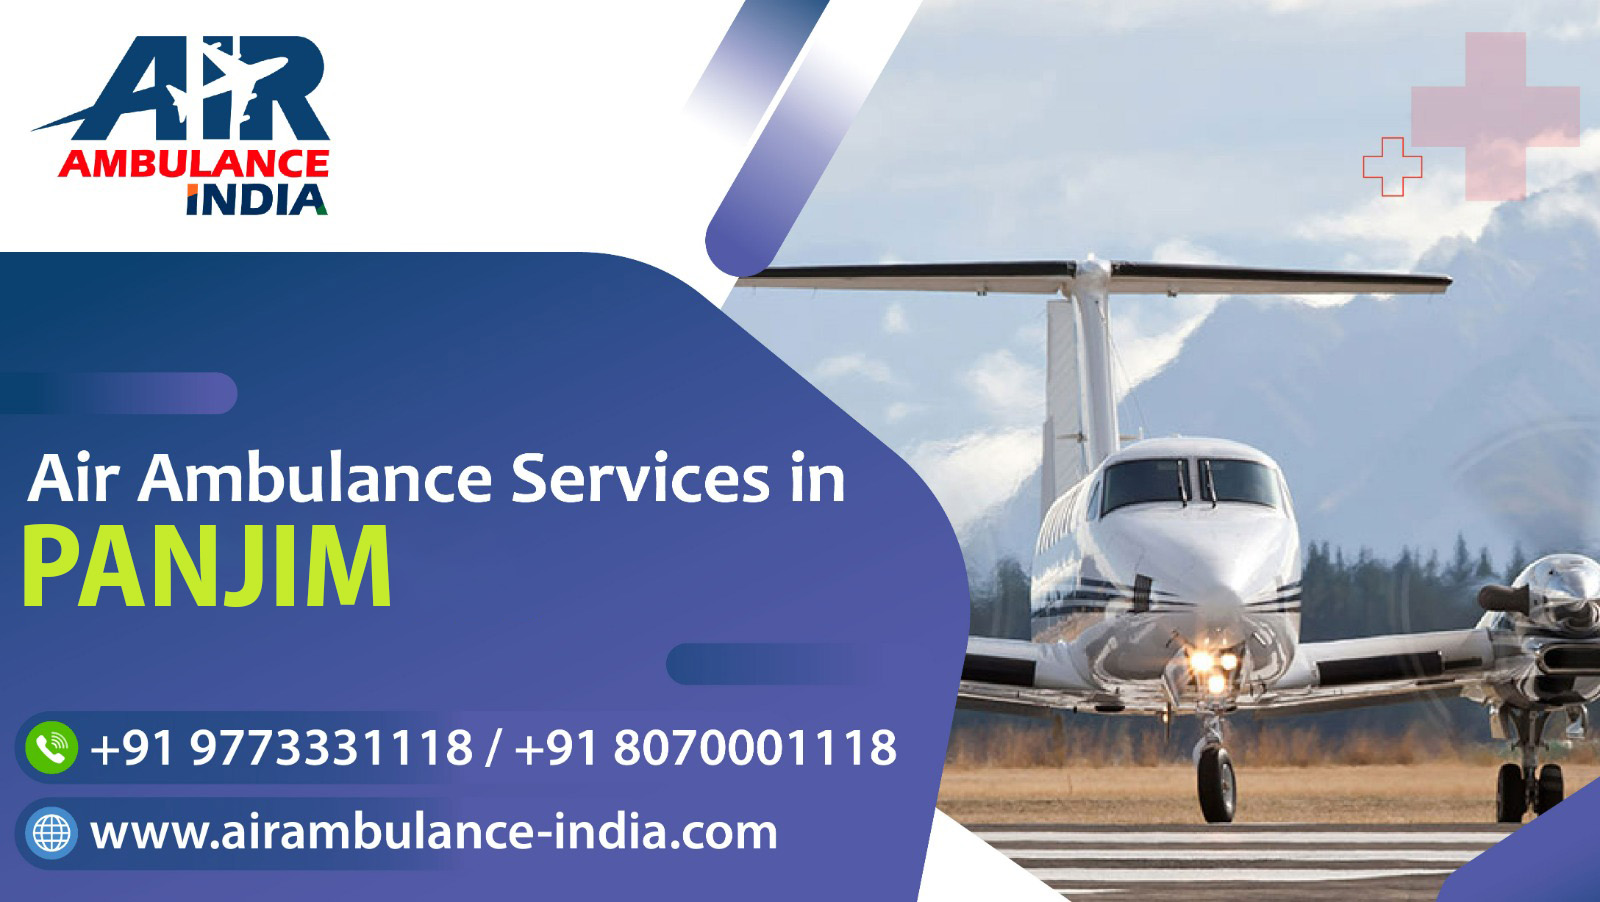 Air Ambulance Services in Panjim